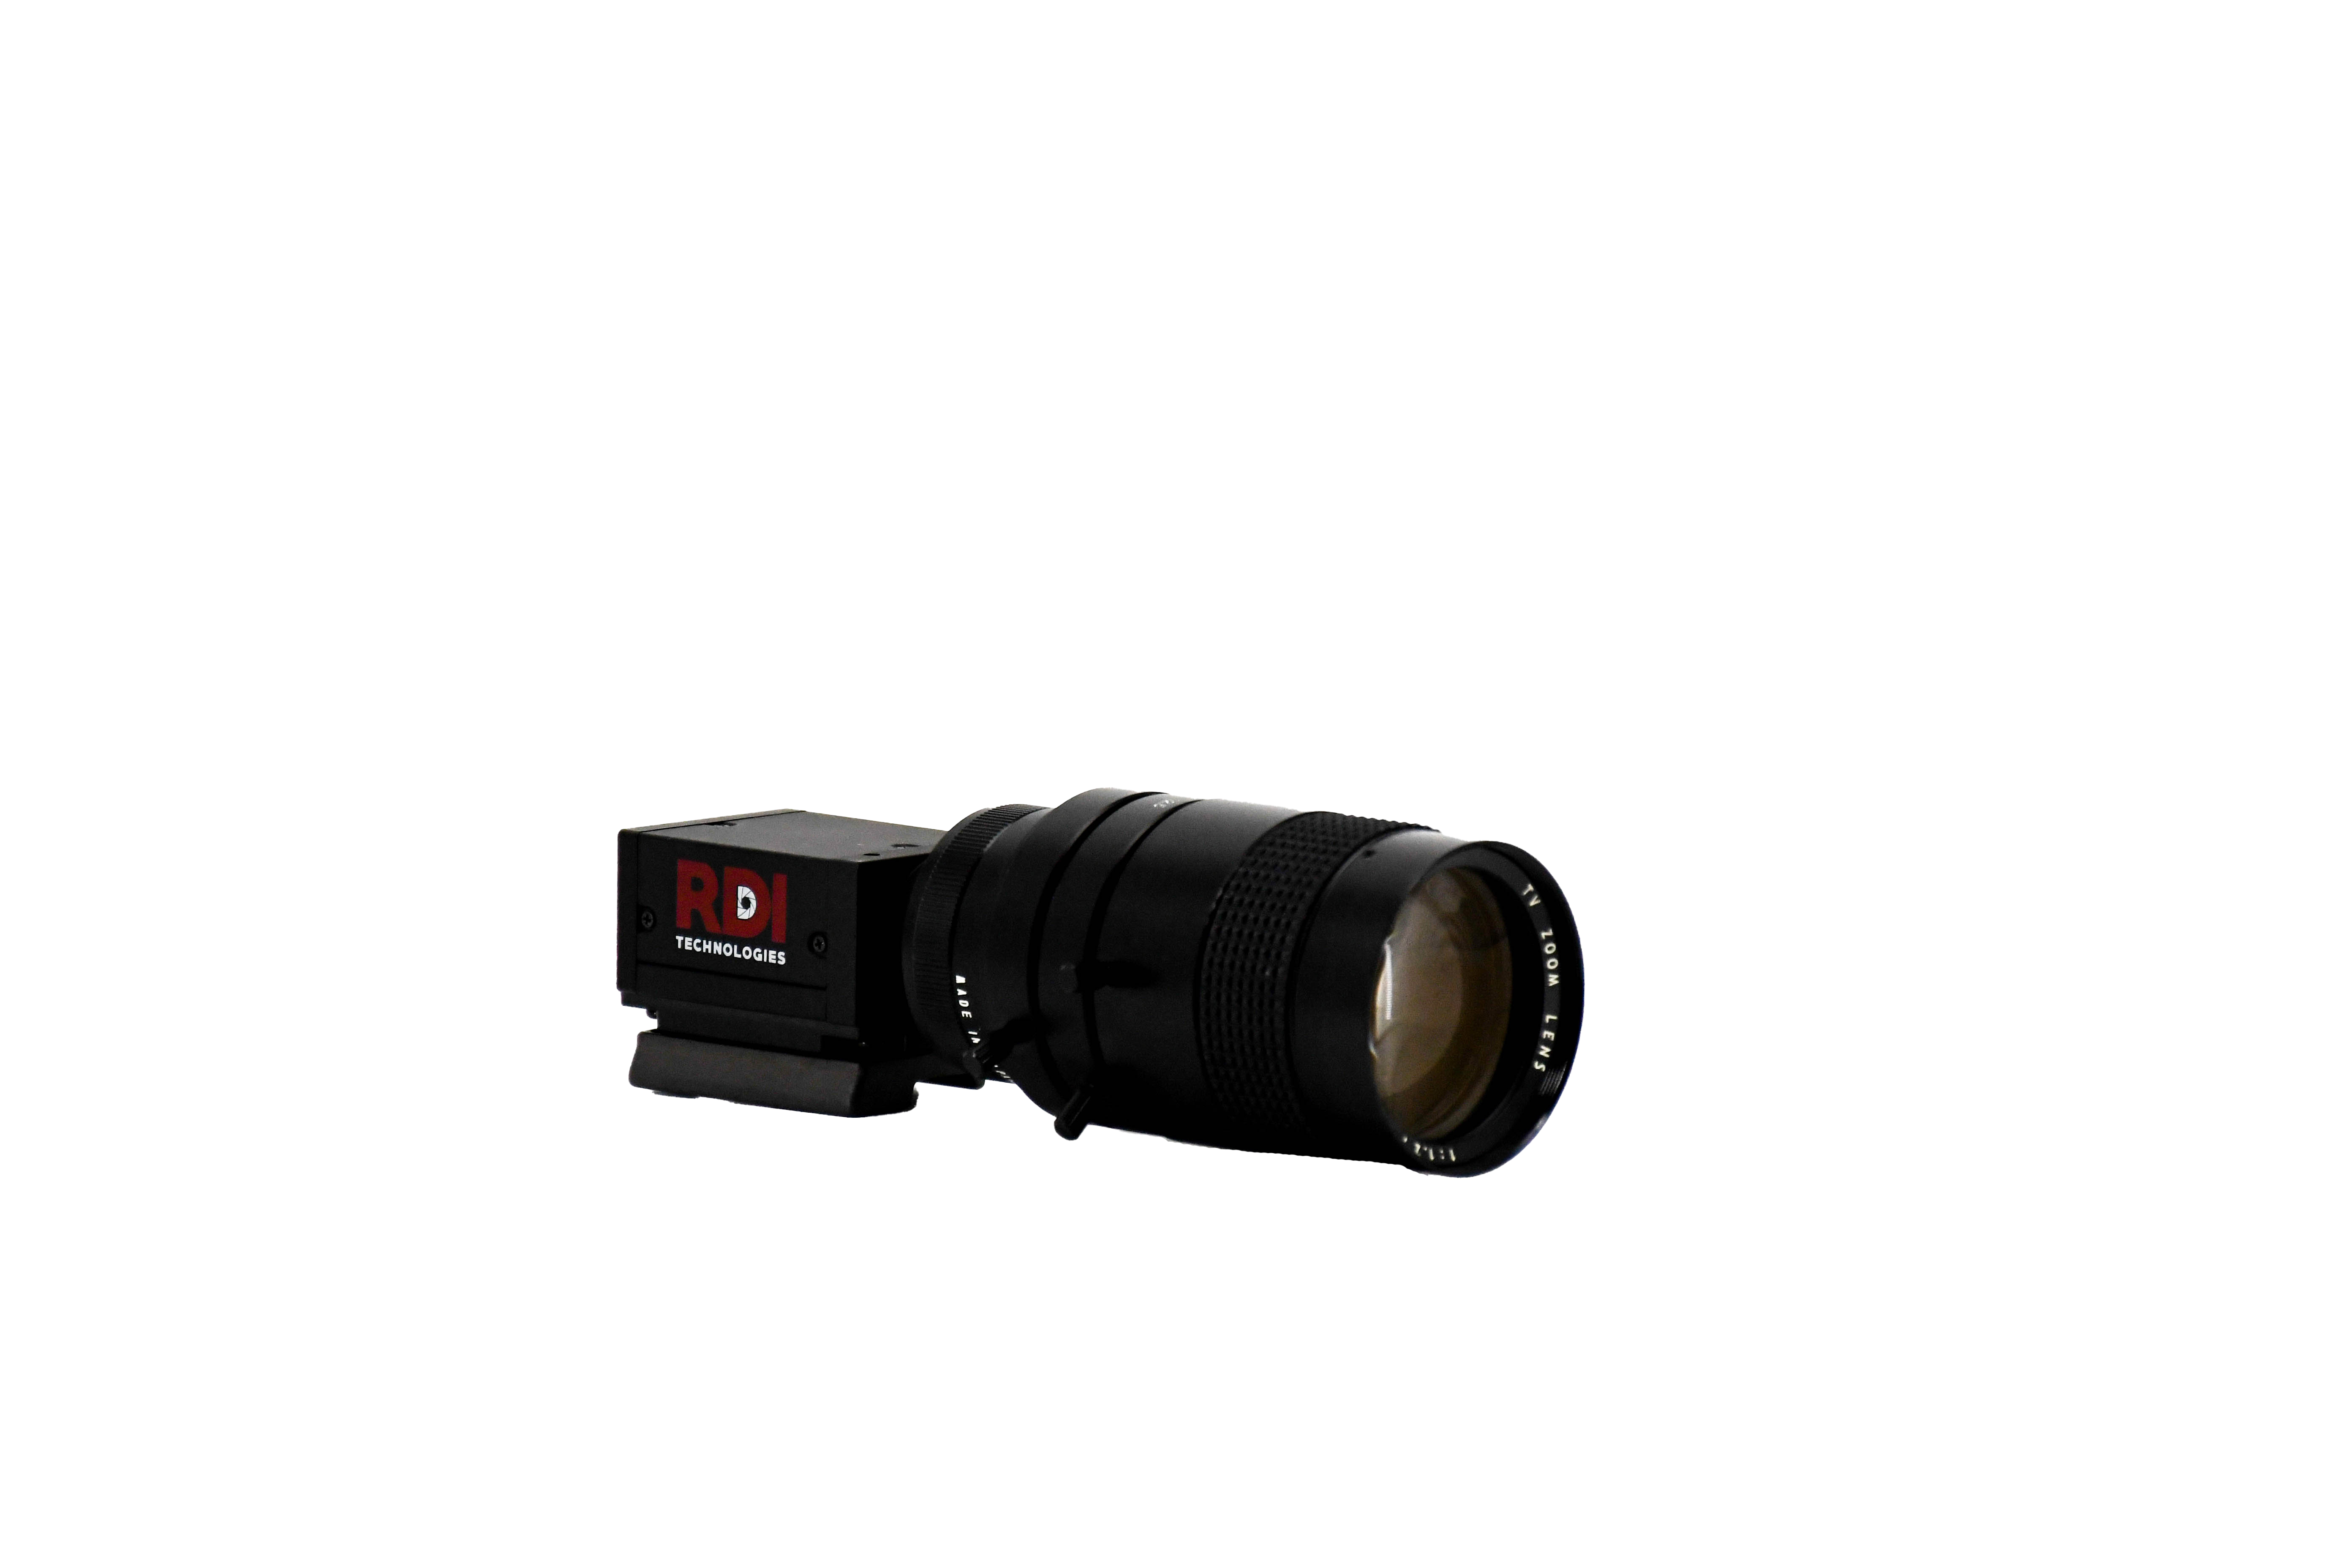 Zoom Lens for the Iris M Traveler shown attached to the camera